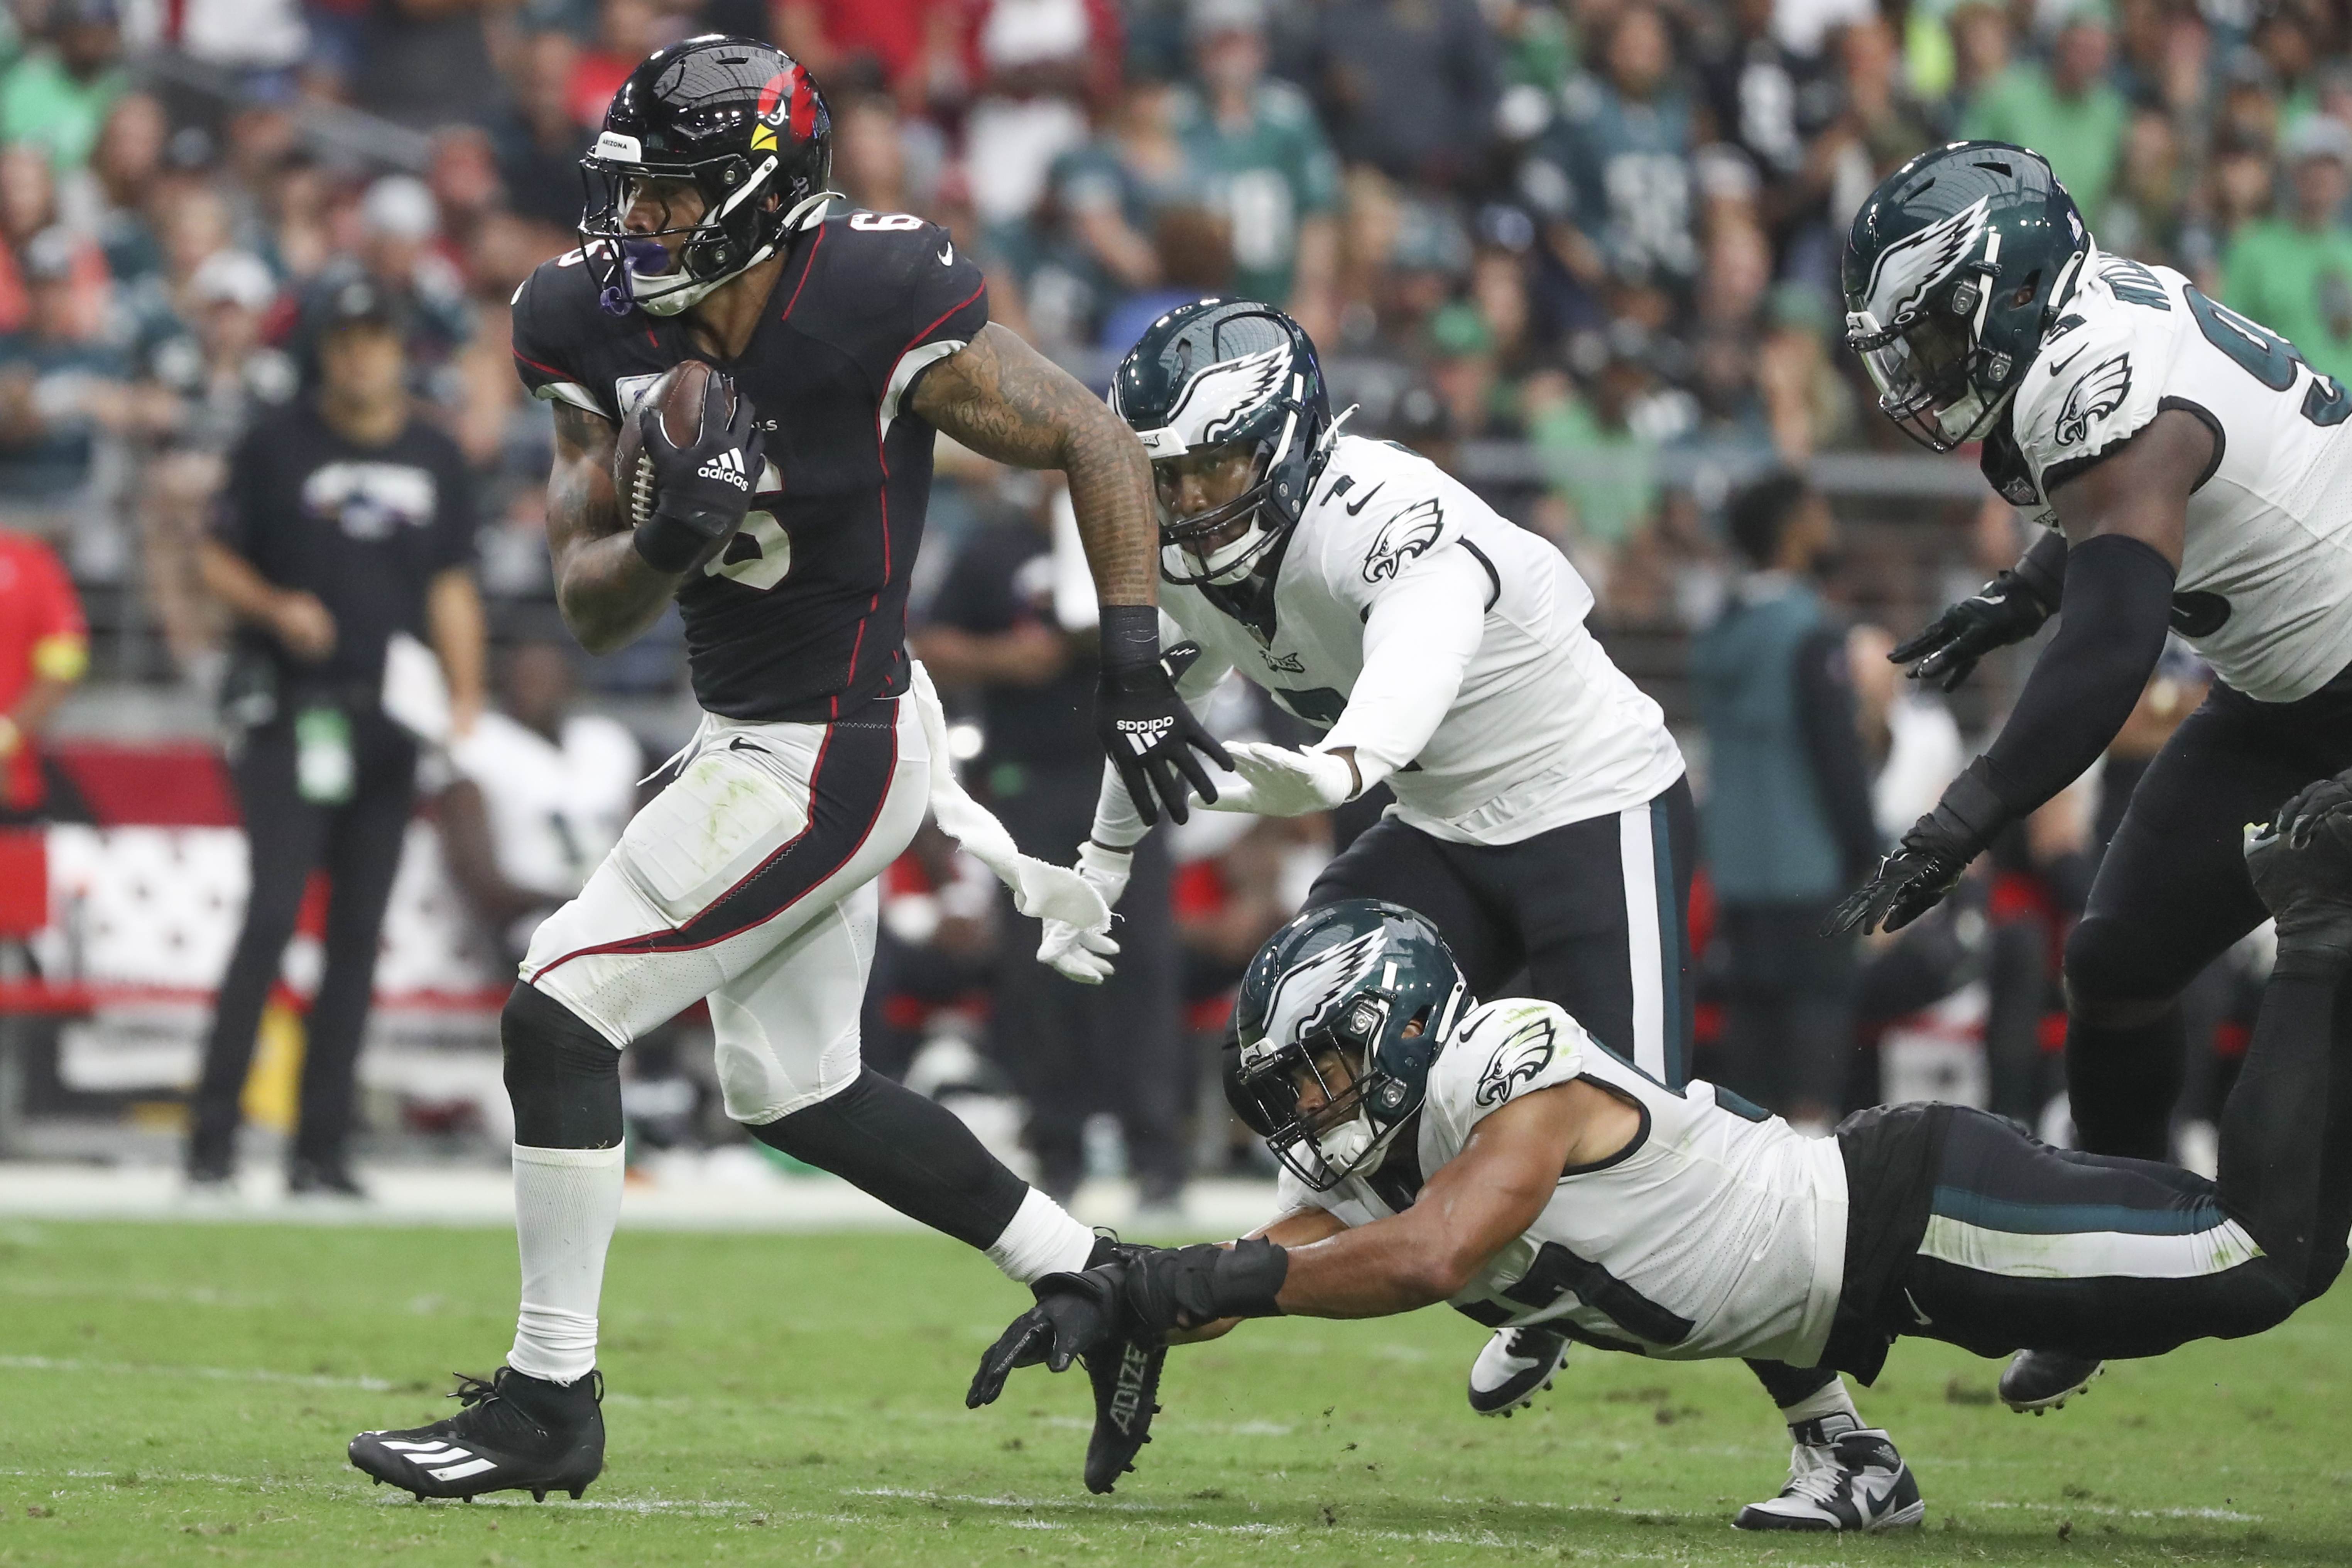 Cameron 'Dicker the Kicker' boots the Eagles past the Cardinals